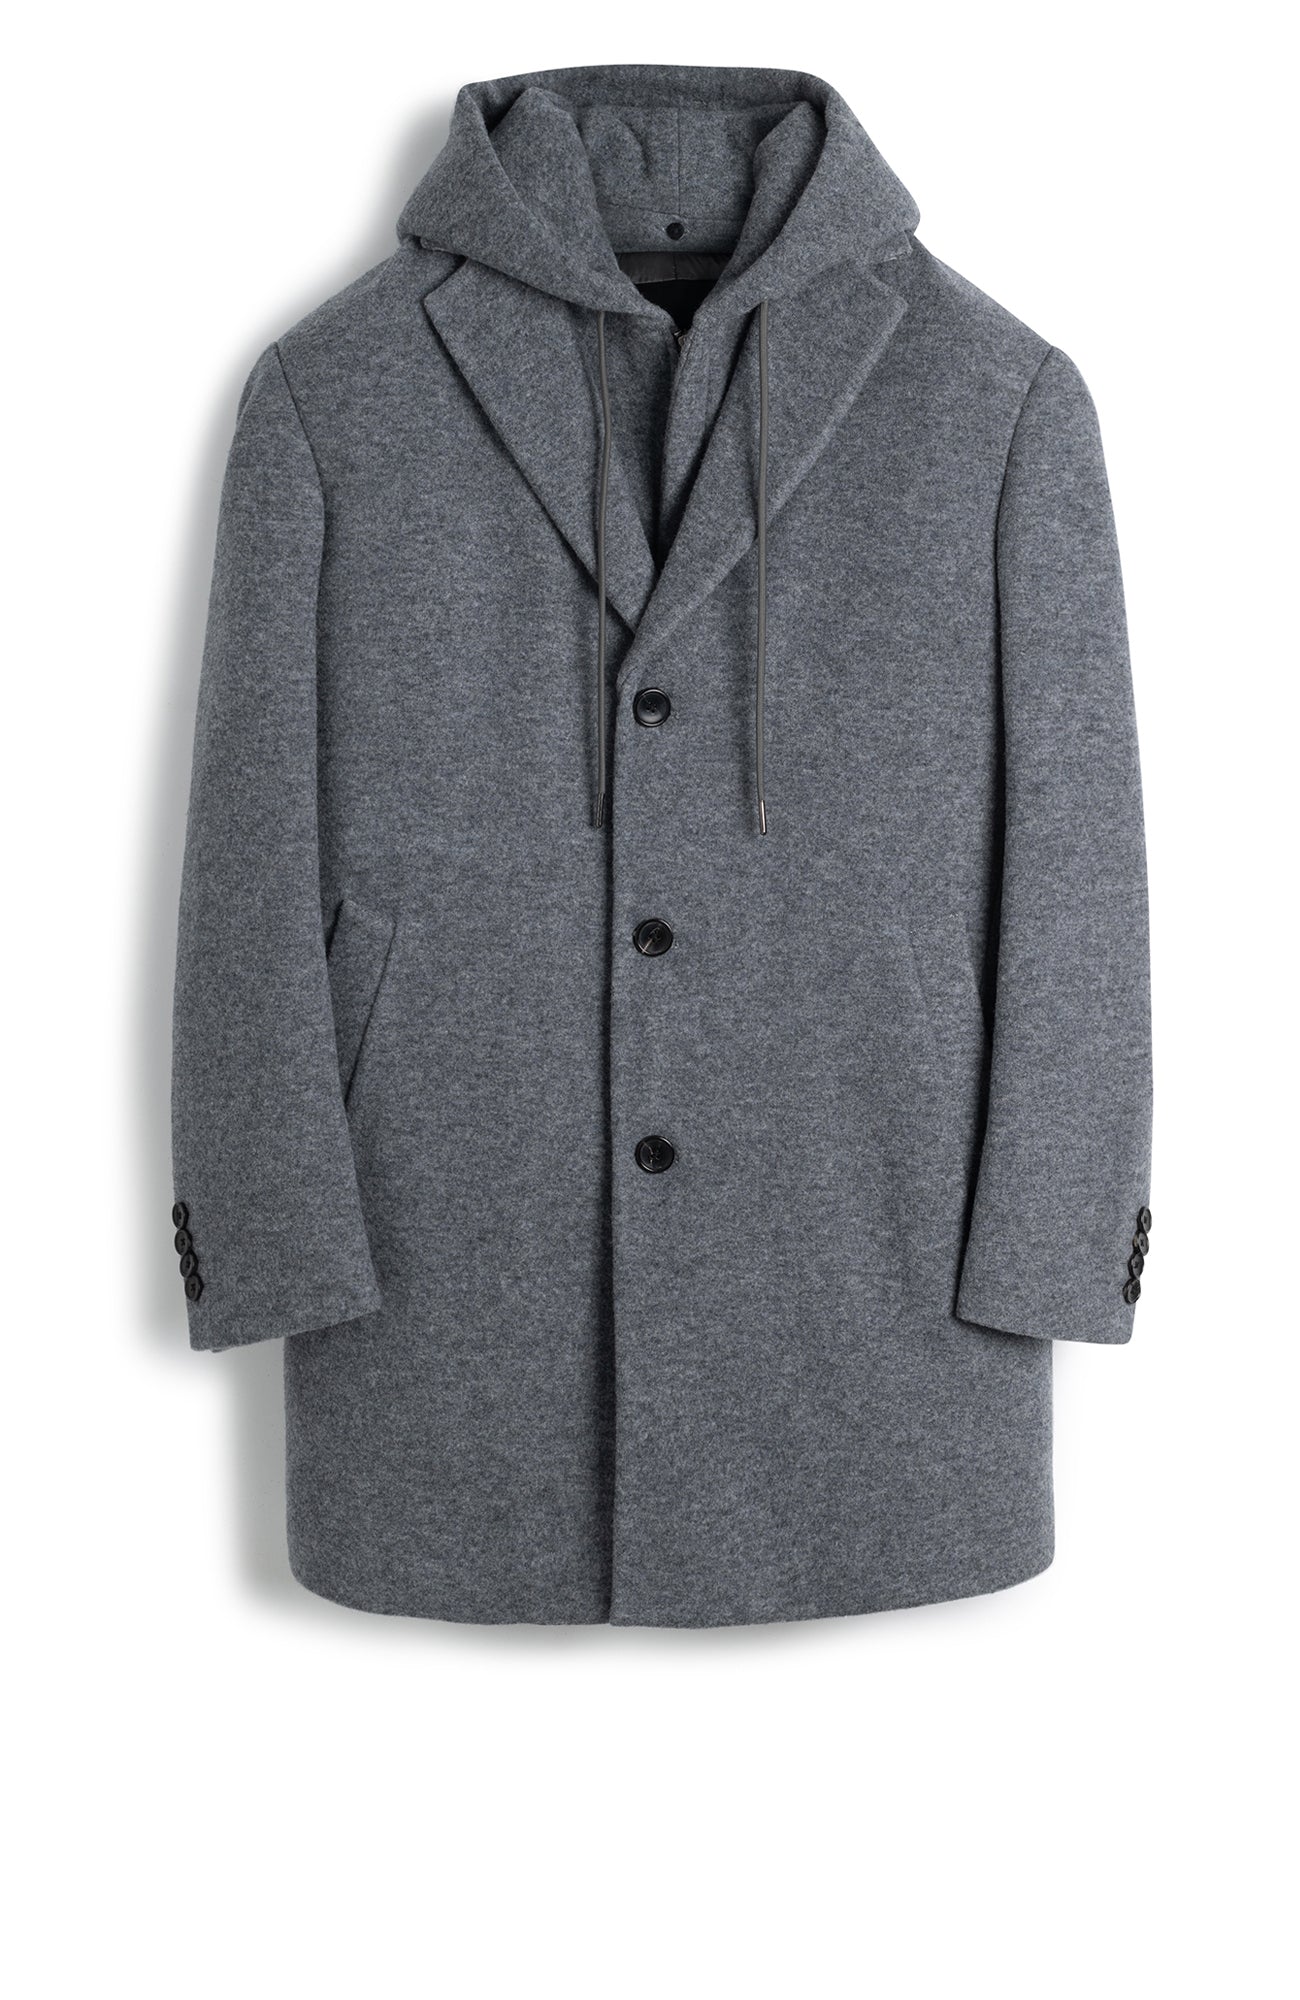 TYSON CHARCOAL TOPCOAT WITH PRIMALOFT INSULATION - MENS - Cardinal of Canada-CA - Tyson - charcoal wool topcoat 36 inch length